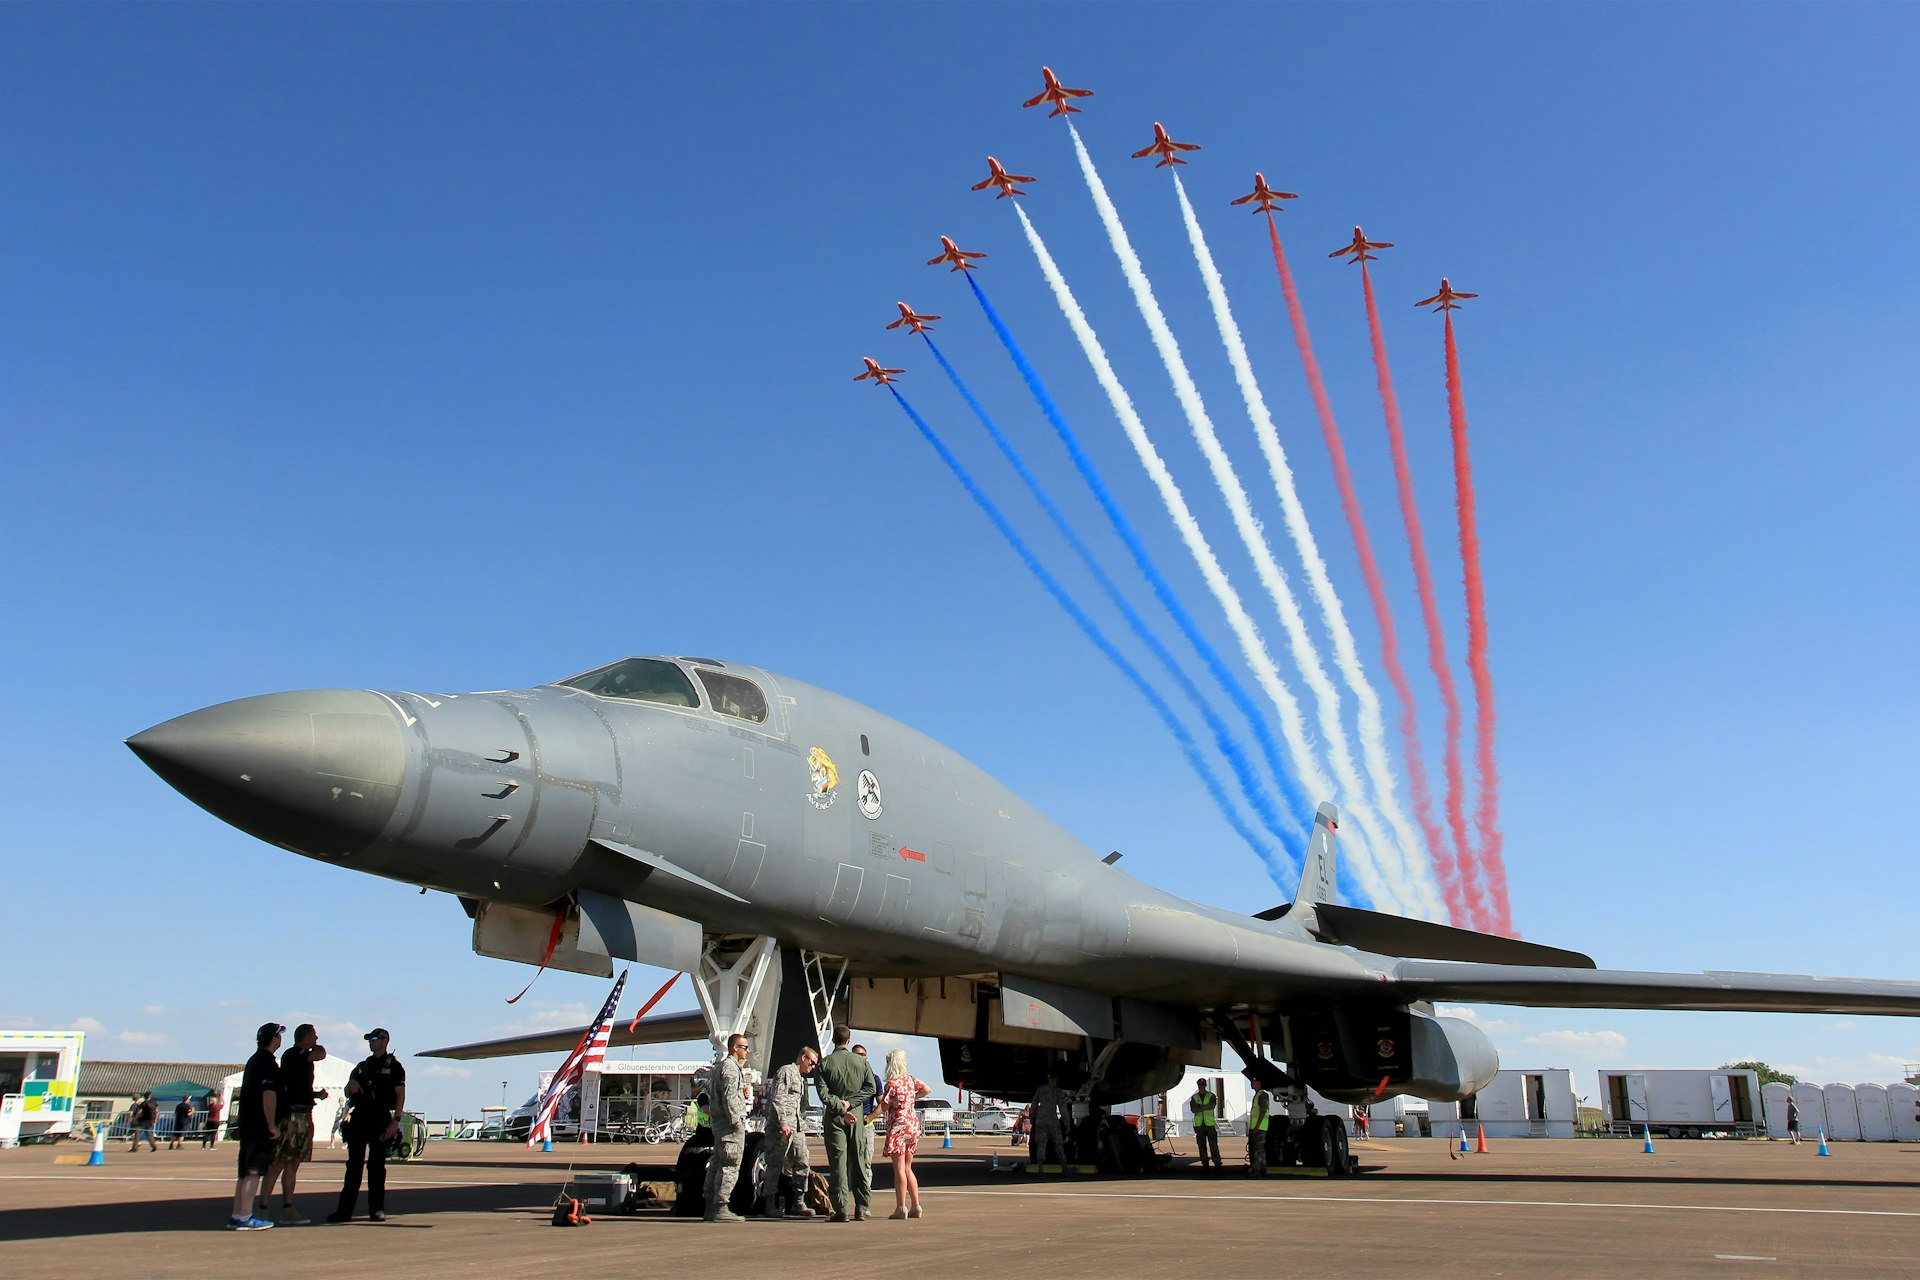 Royal International Air Tattoo appoints creative agency PinPoint Media